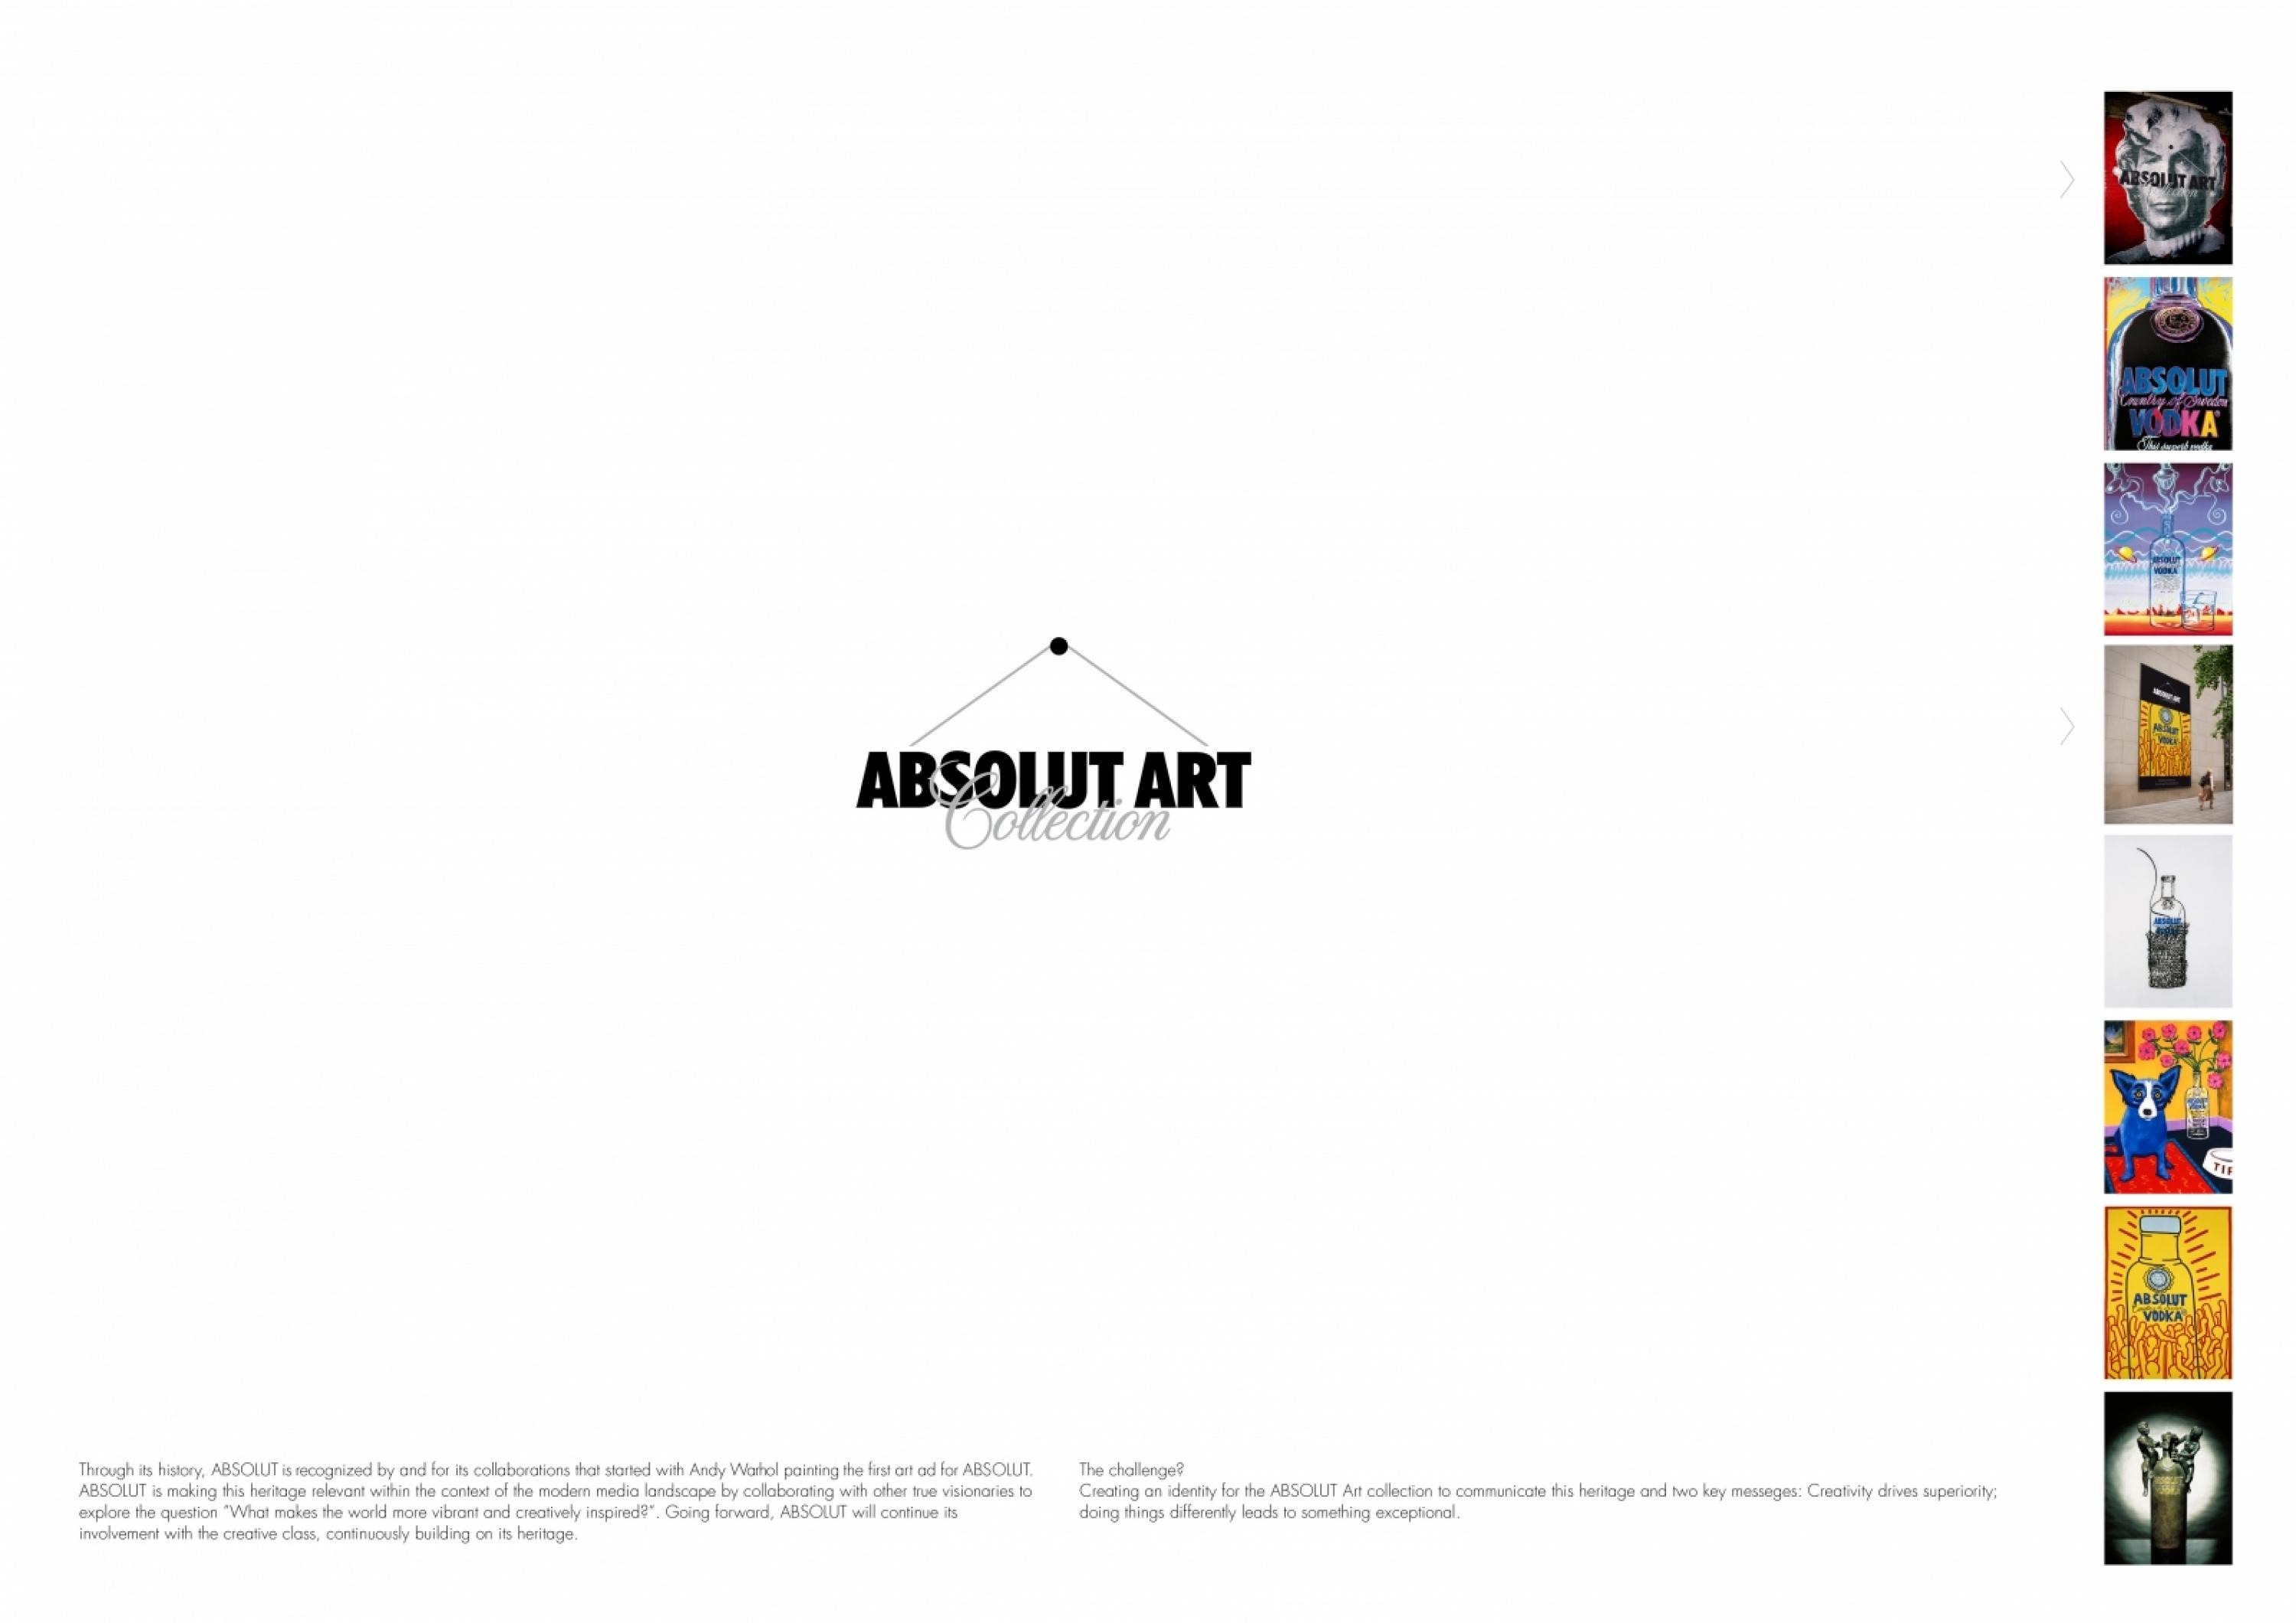 ABSOLUT ALCOHOL